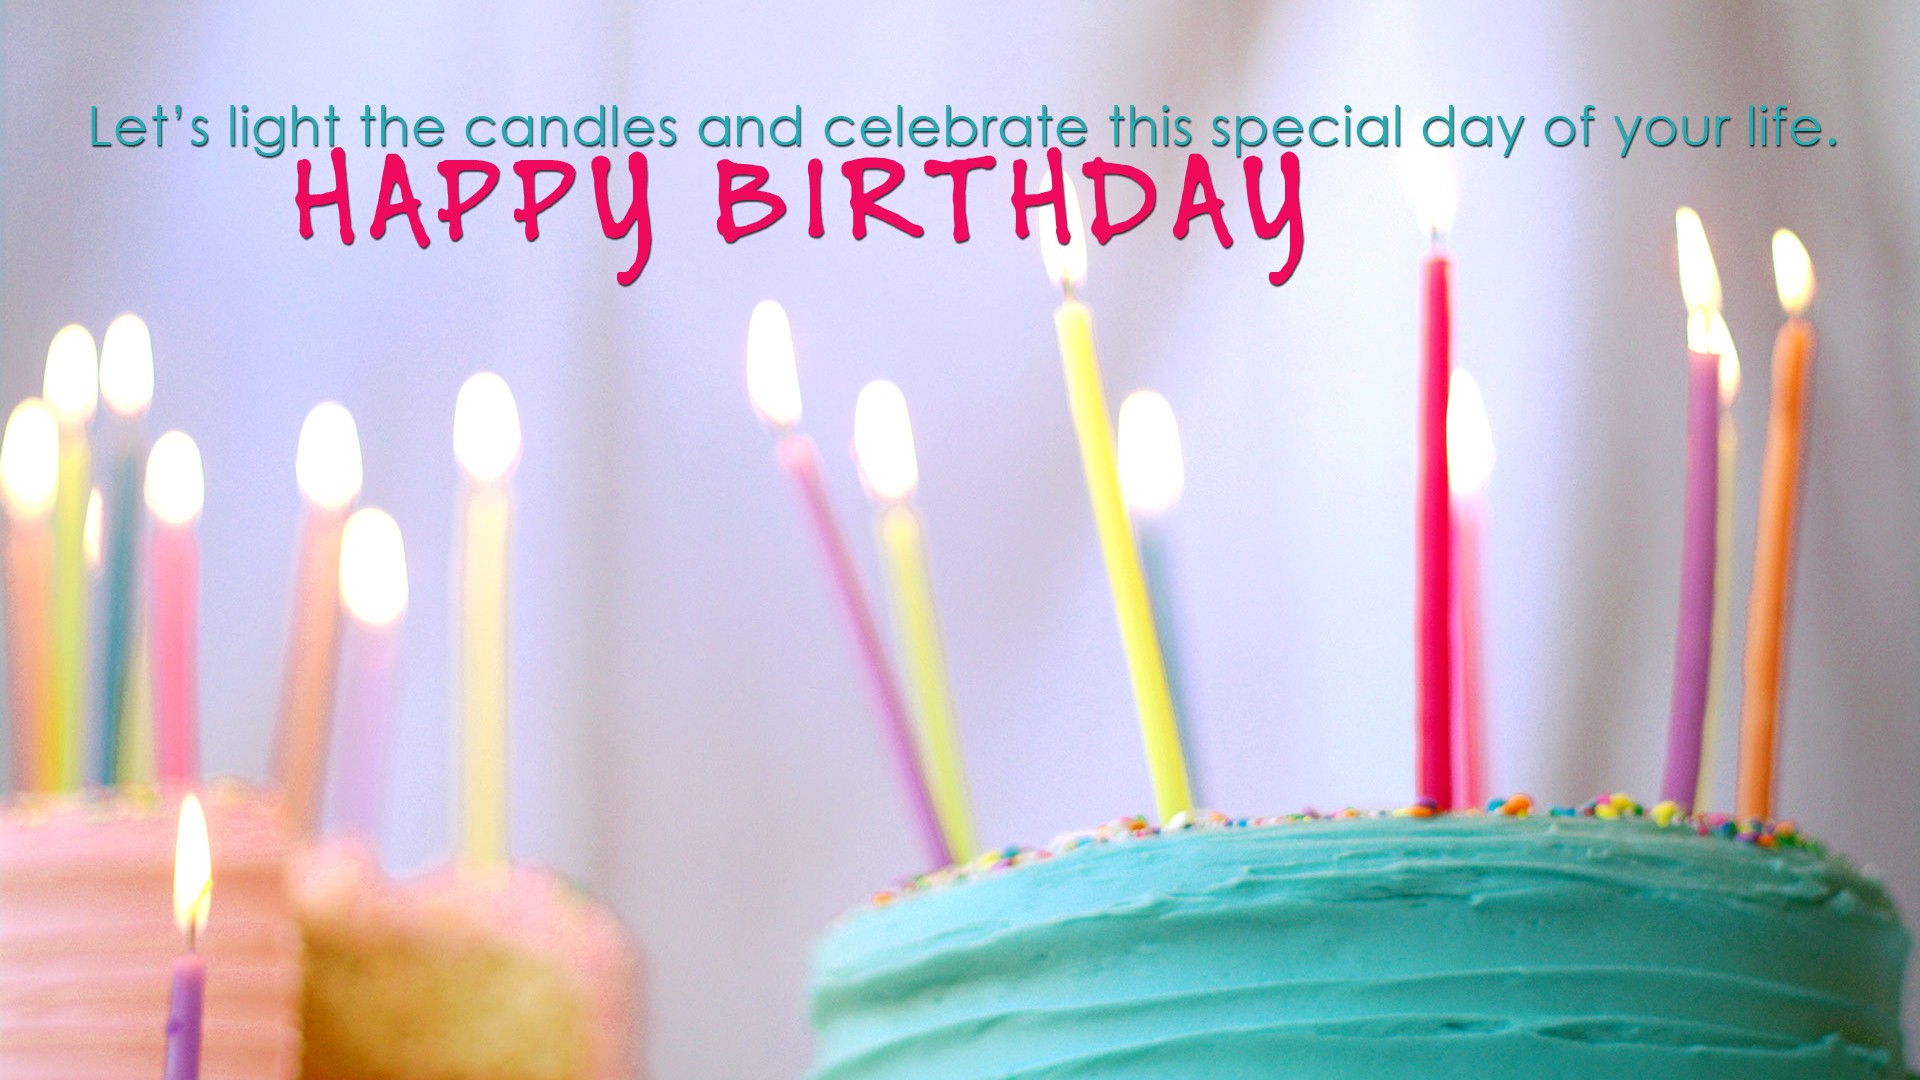 Happy Birthday With Wishes Quote Hd Wallpapers - Happy Birthday Quote Hd -  1920x1080 Wallpaper 